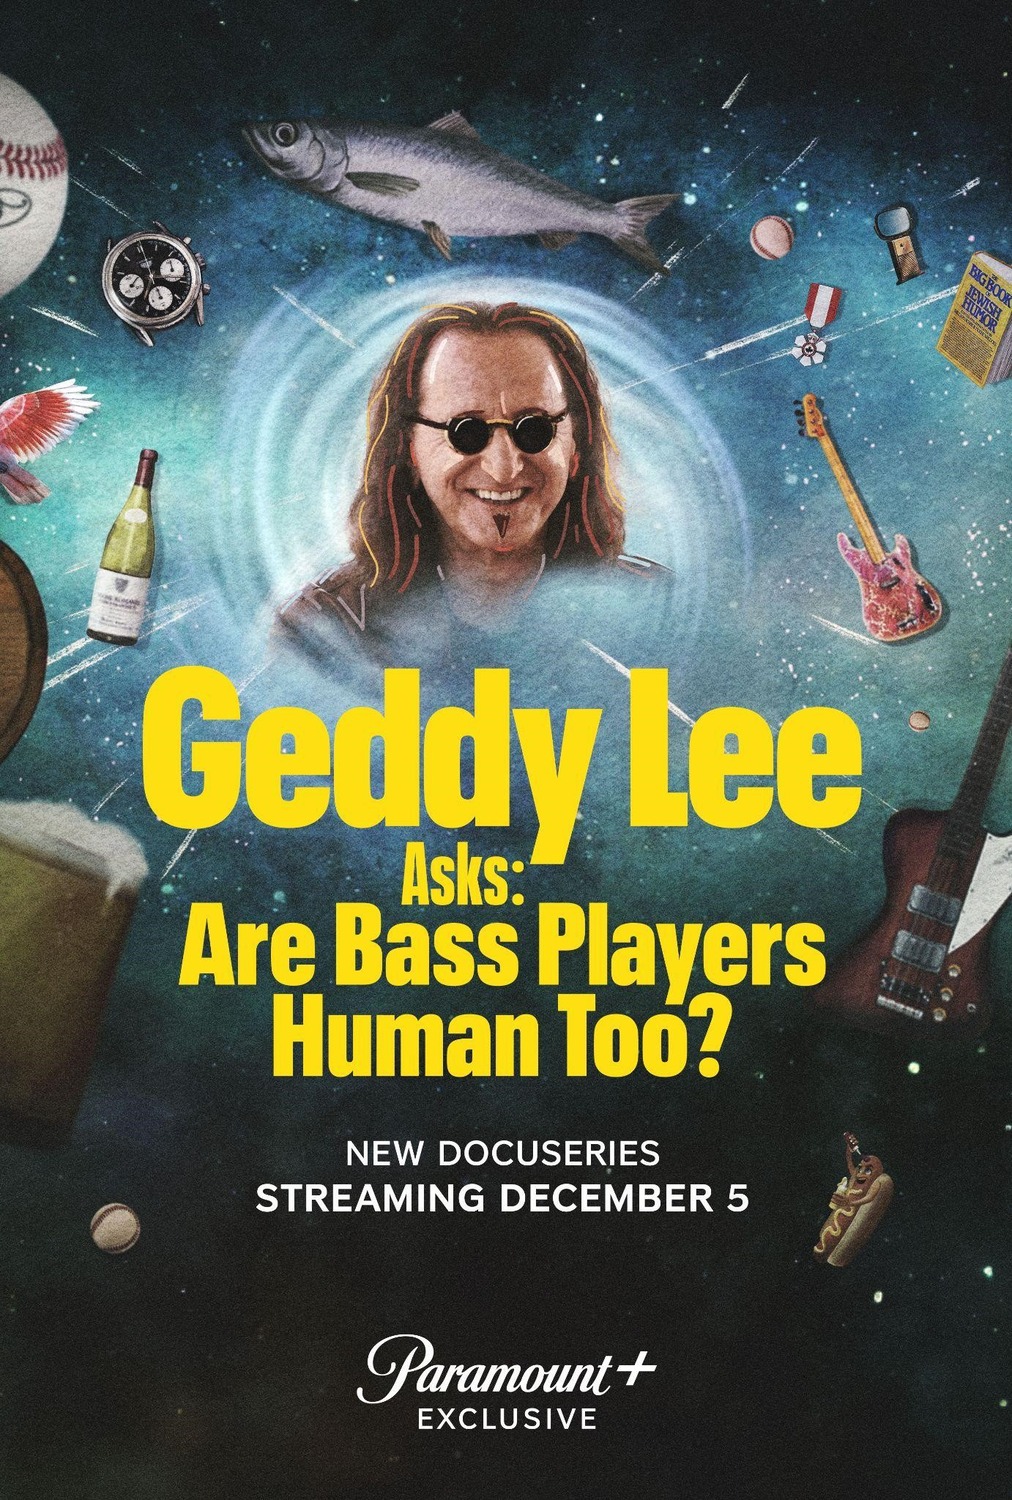 Extra Large TV Poster Image for Geddy Lee Asks: Are Bass Players Human Too? 